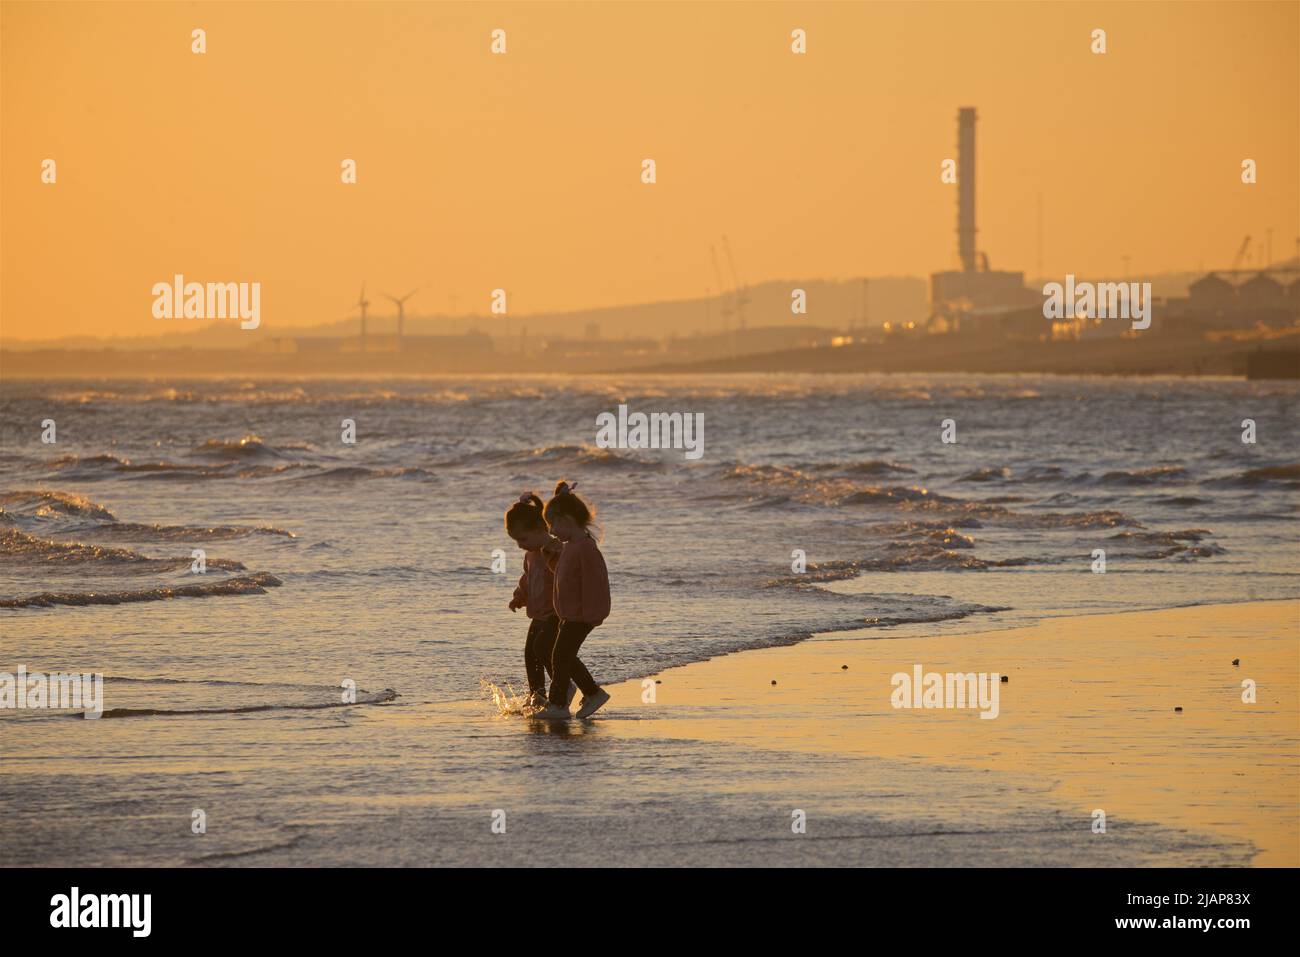 Two young girls walking along the shoreline at low tide, Brighton, Sussex, England, UK. Sunset / dusk. Shoreham Power Station in the background. Stock Photo